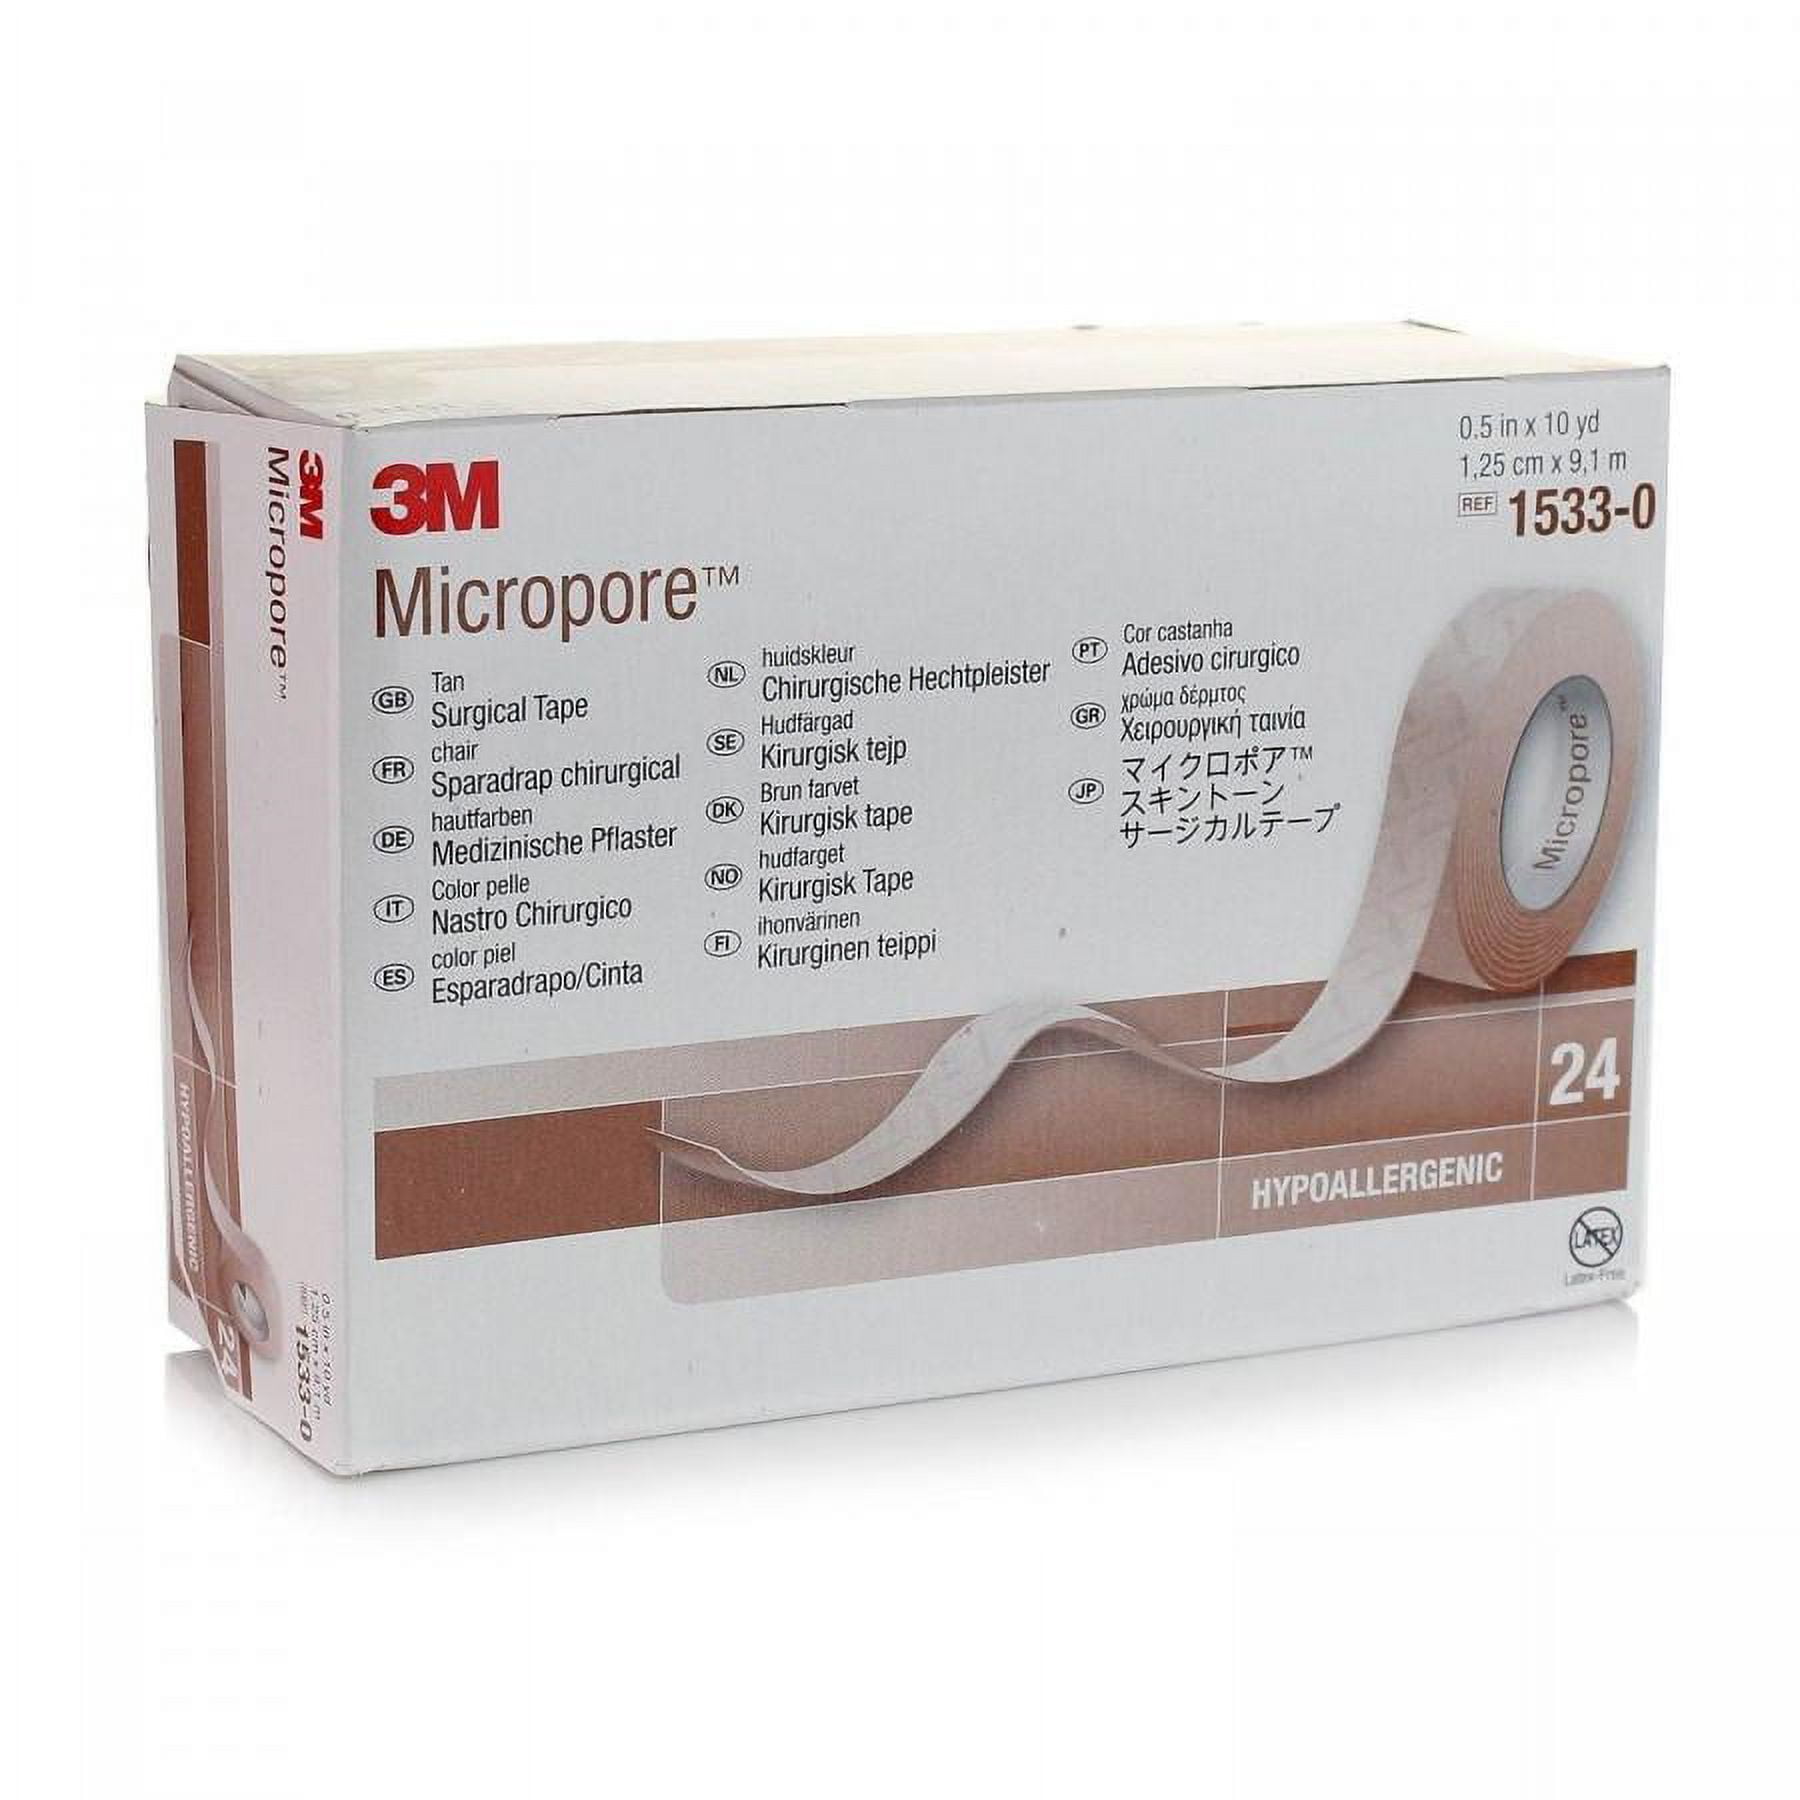 3M Micropore Surgical Tape - Alliance Tattoo Supply